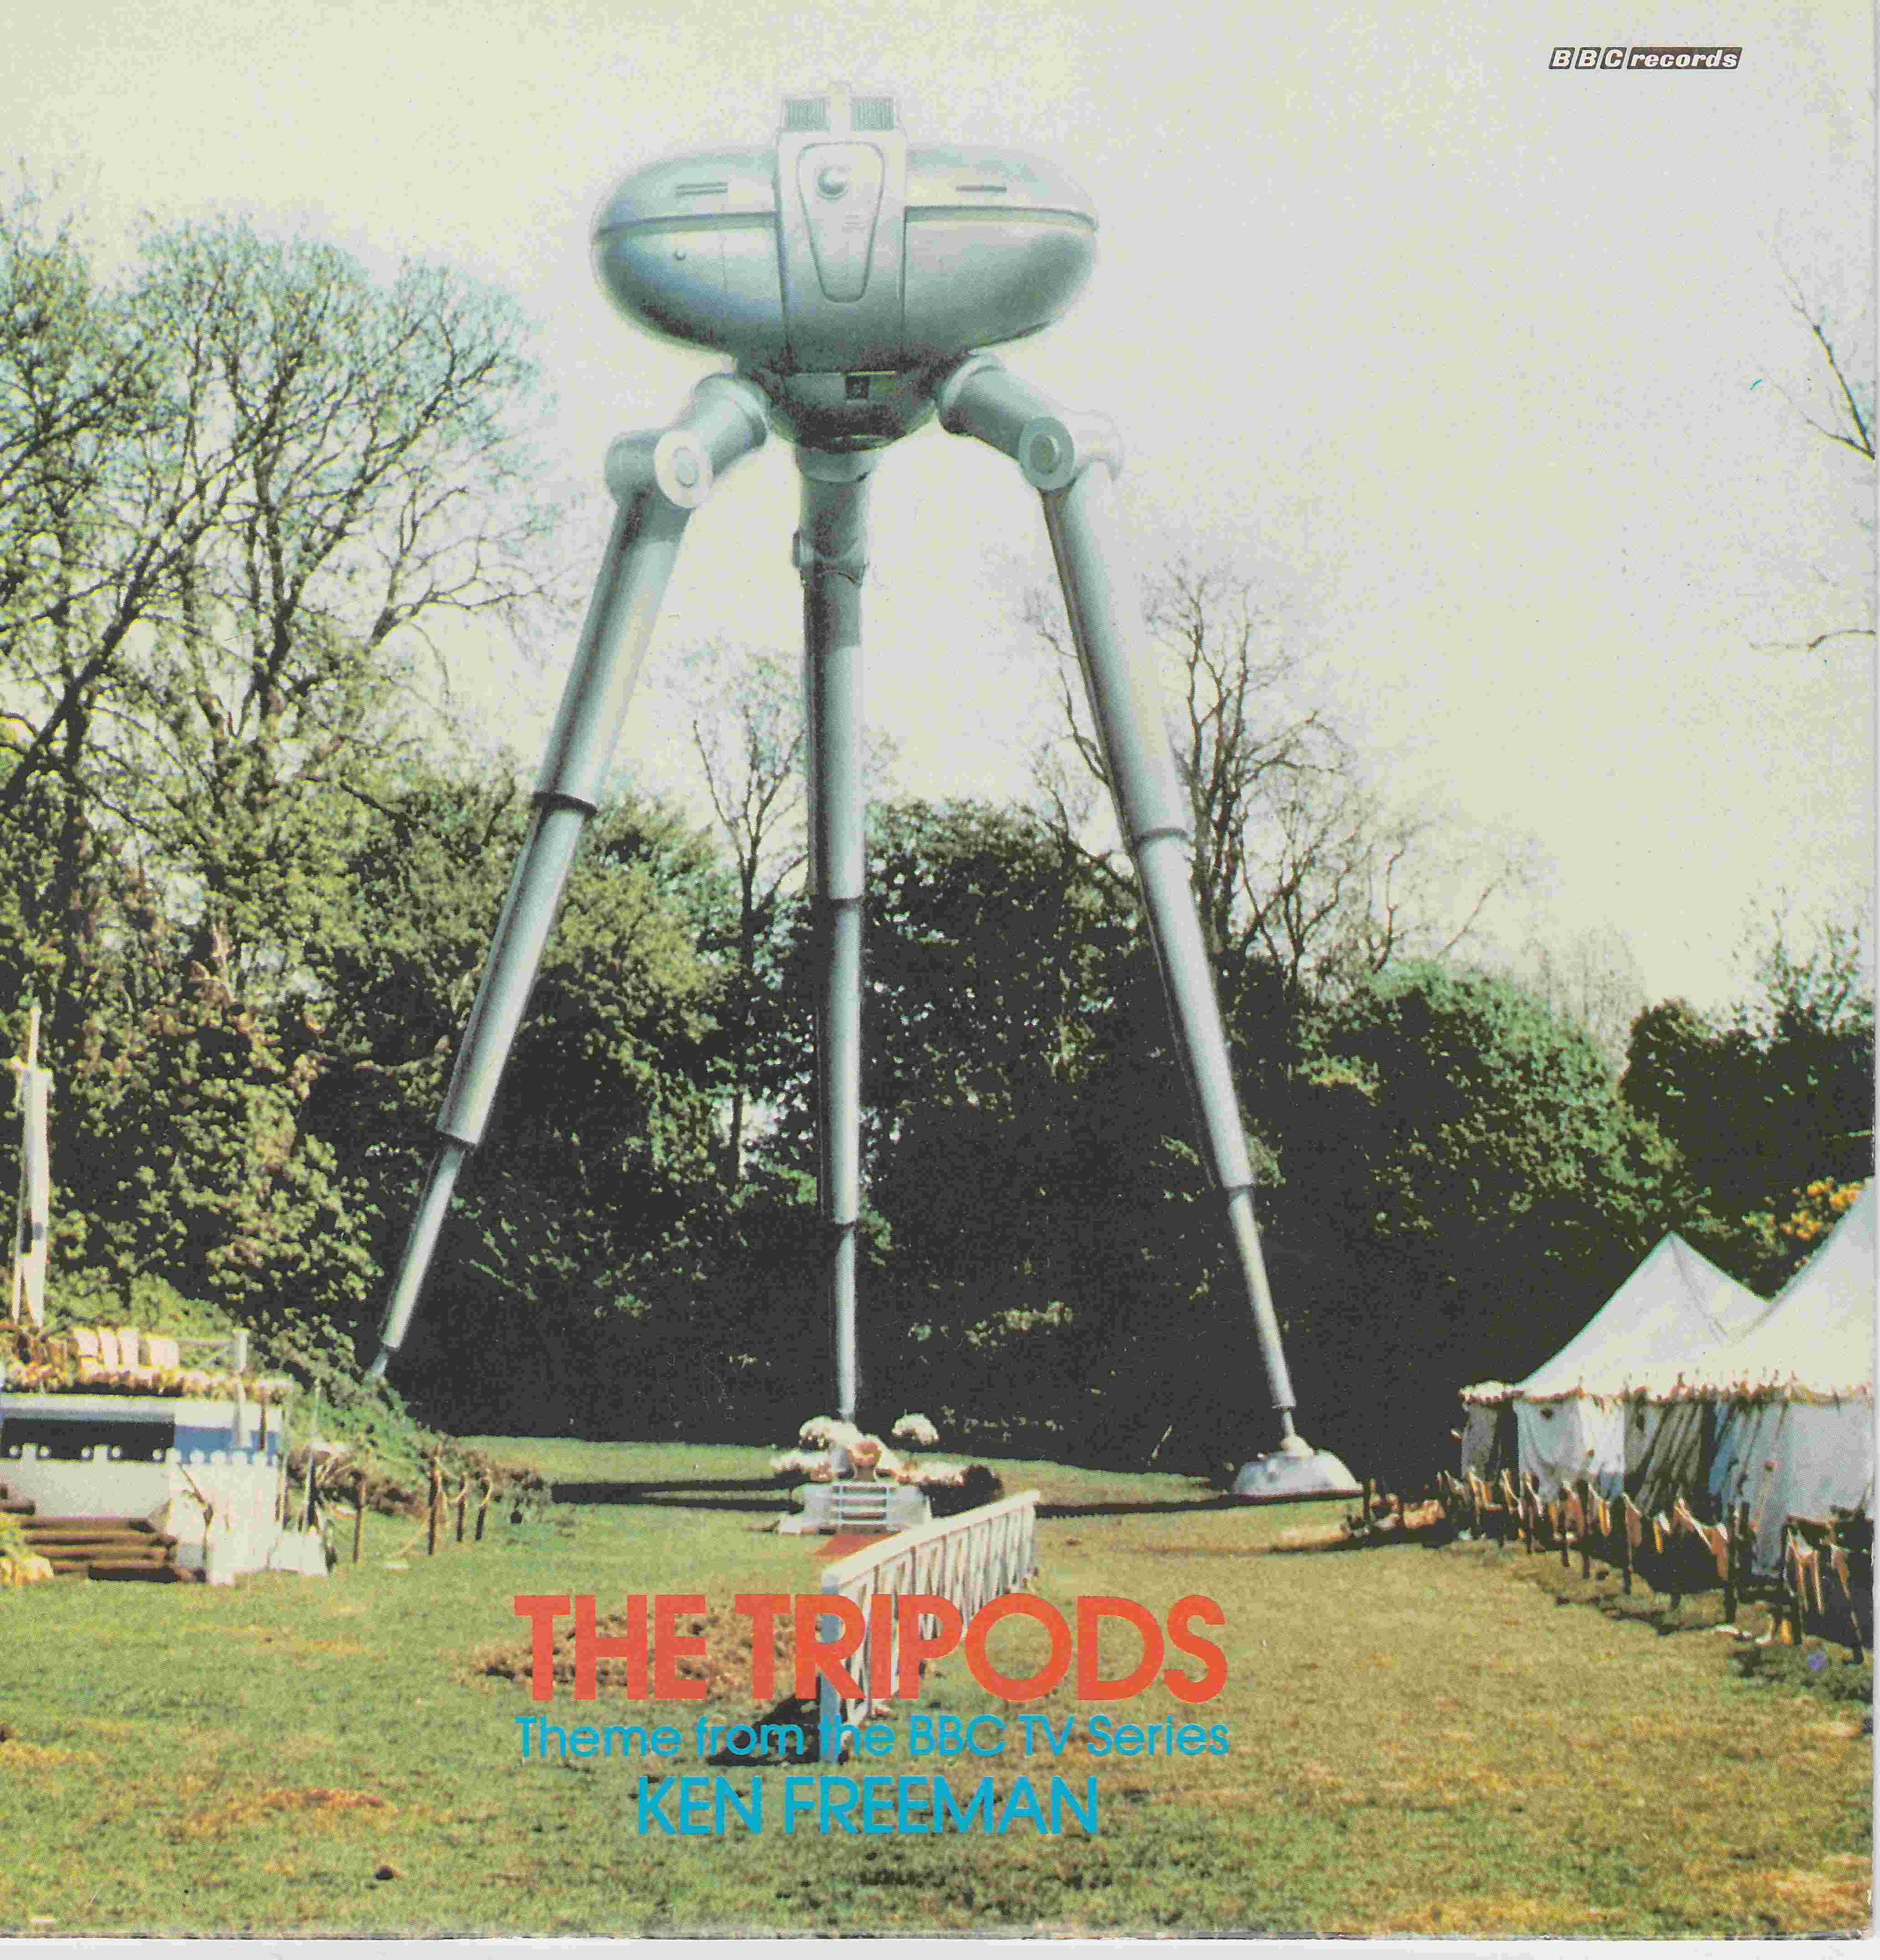 Picture of The tripods - Opening theme by artist Ken Freeman from the BBC singles - Records and Tapes library